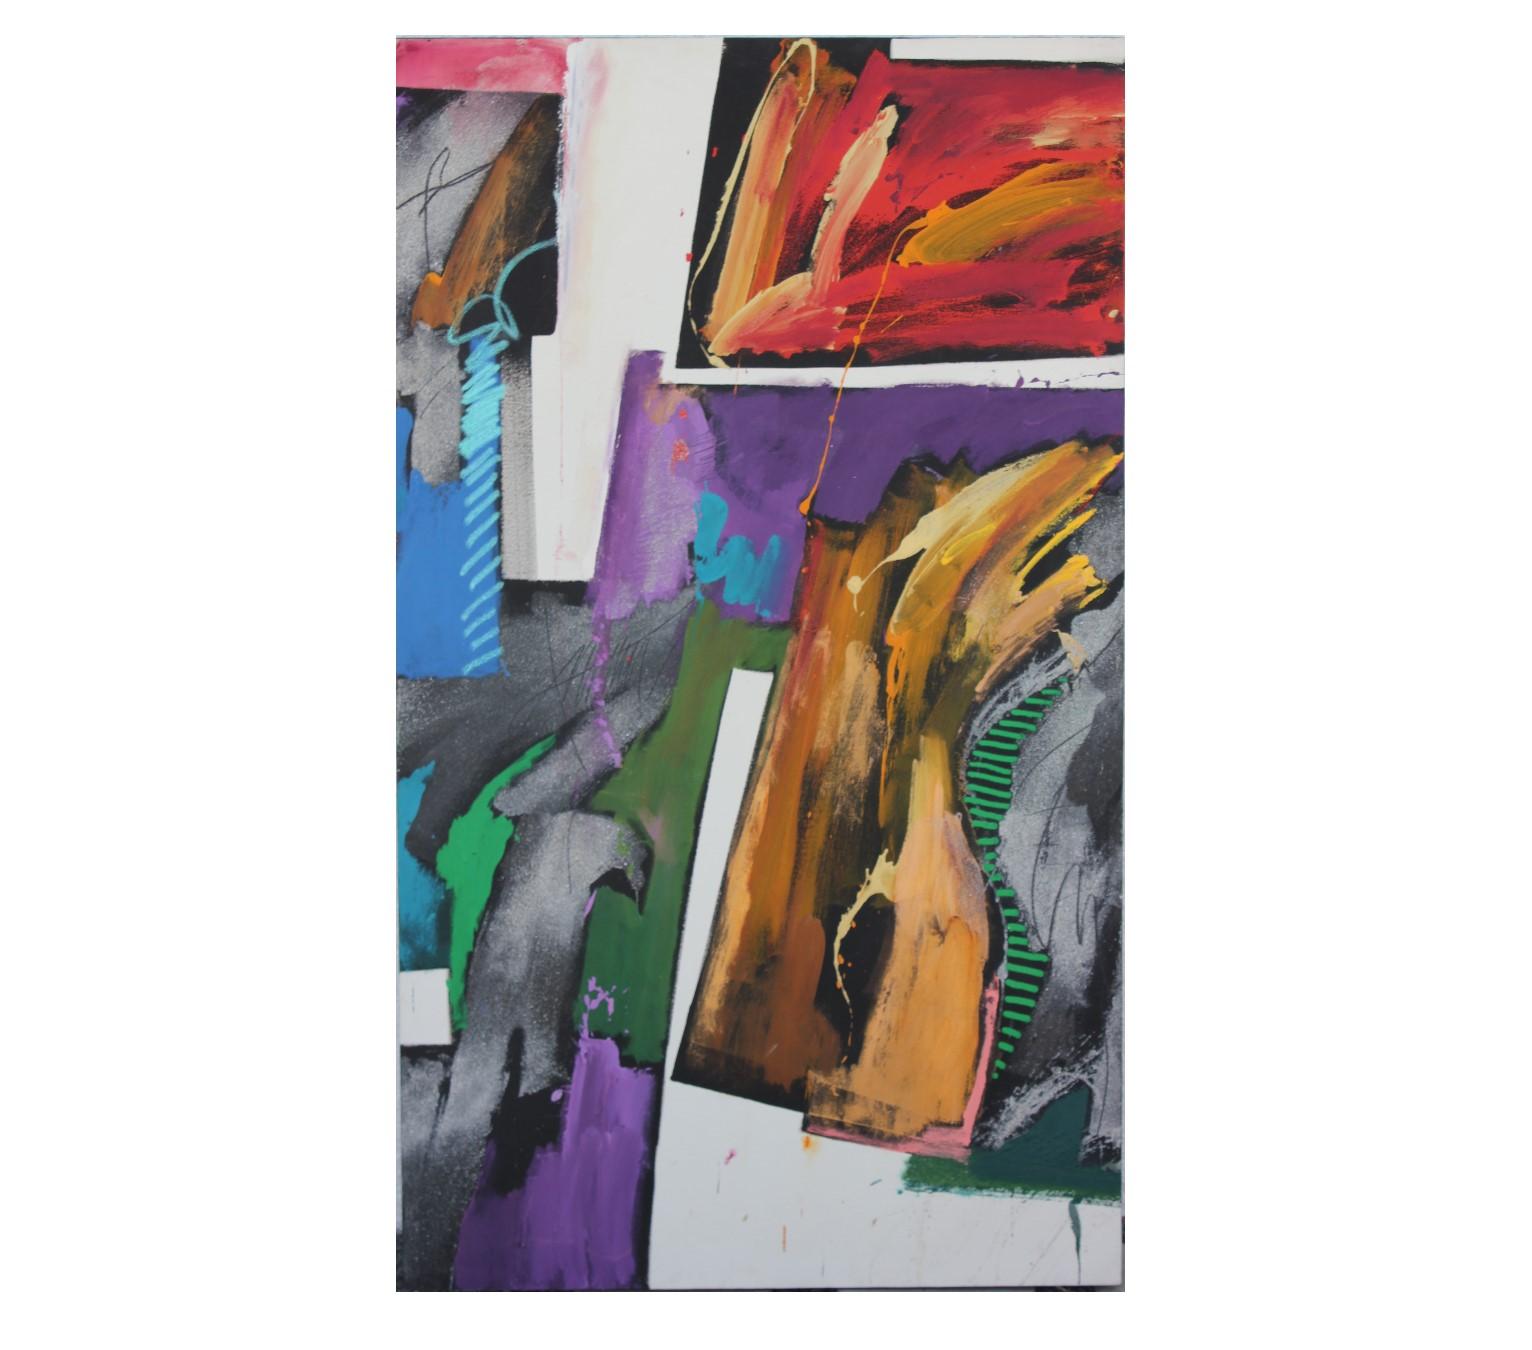 Three canvas triptych flowing movement of geometric shapes in various colors. Painting has textured sand mixed into the movement of shapes. Sold in a set of three. Canvases are not framed.
Dimensions of Single Panel: H 72 in. x W 42 in. x D 1.5